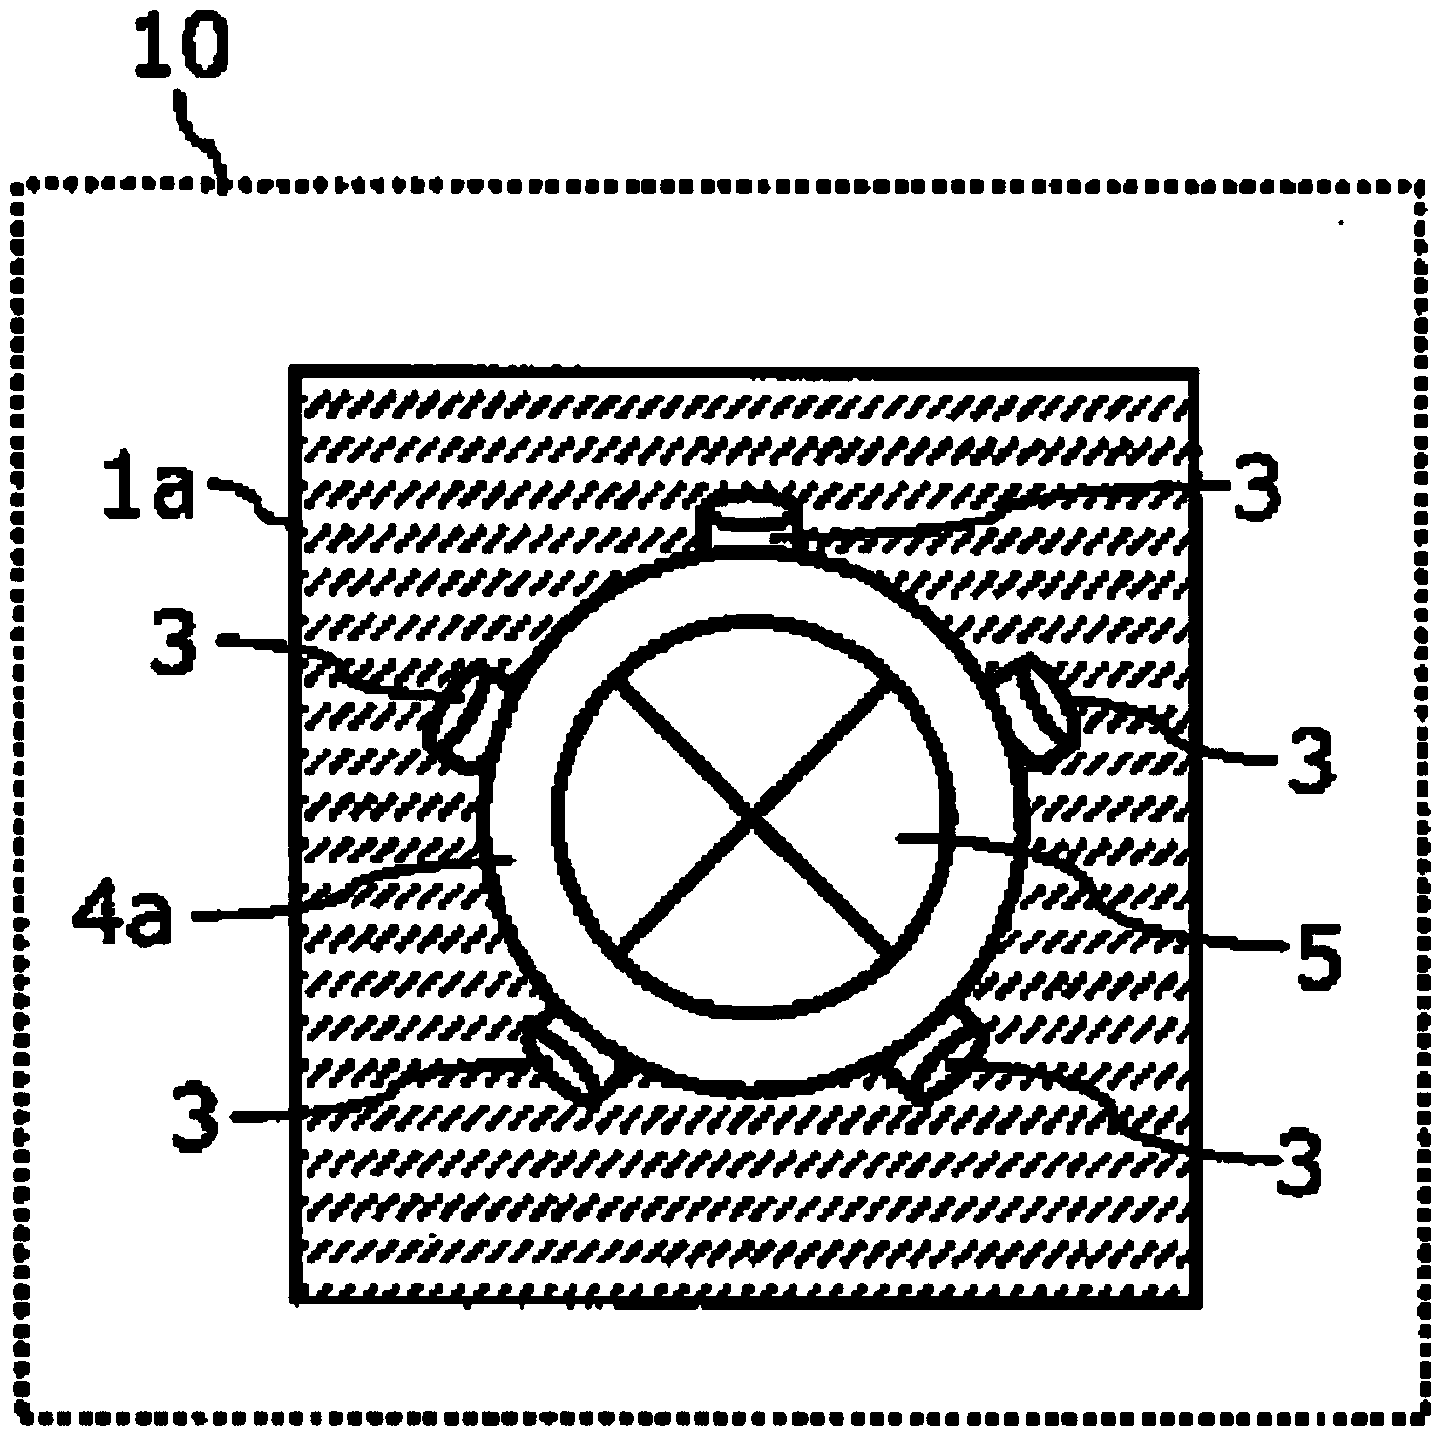 Electrically conductive pin connection